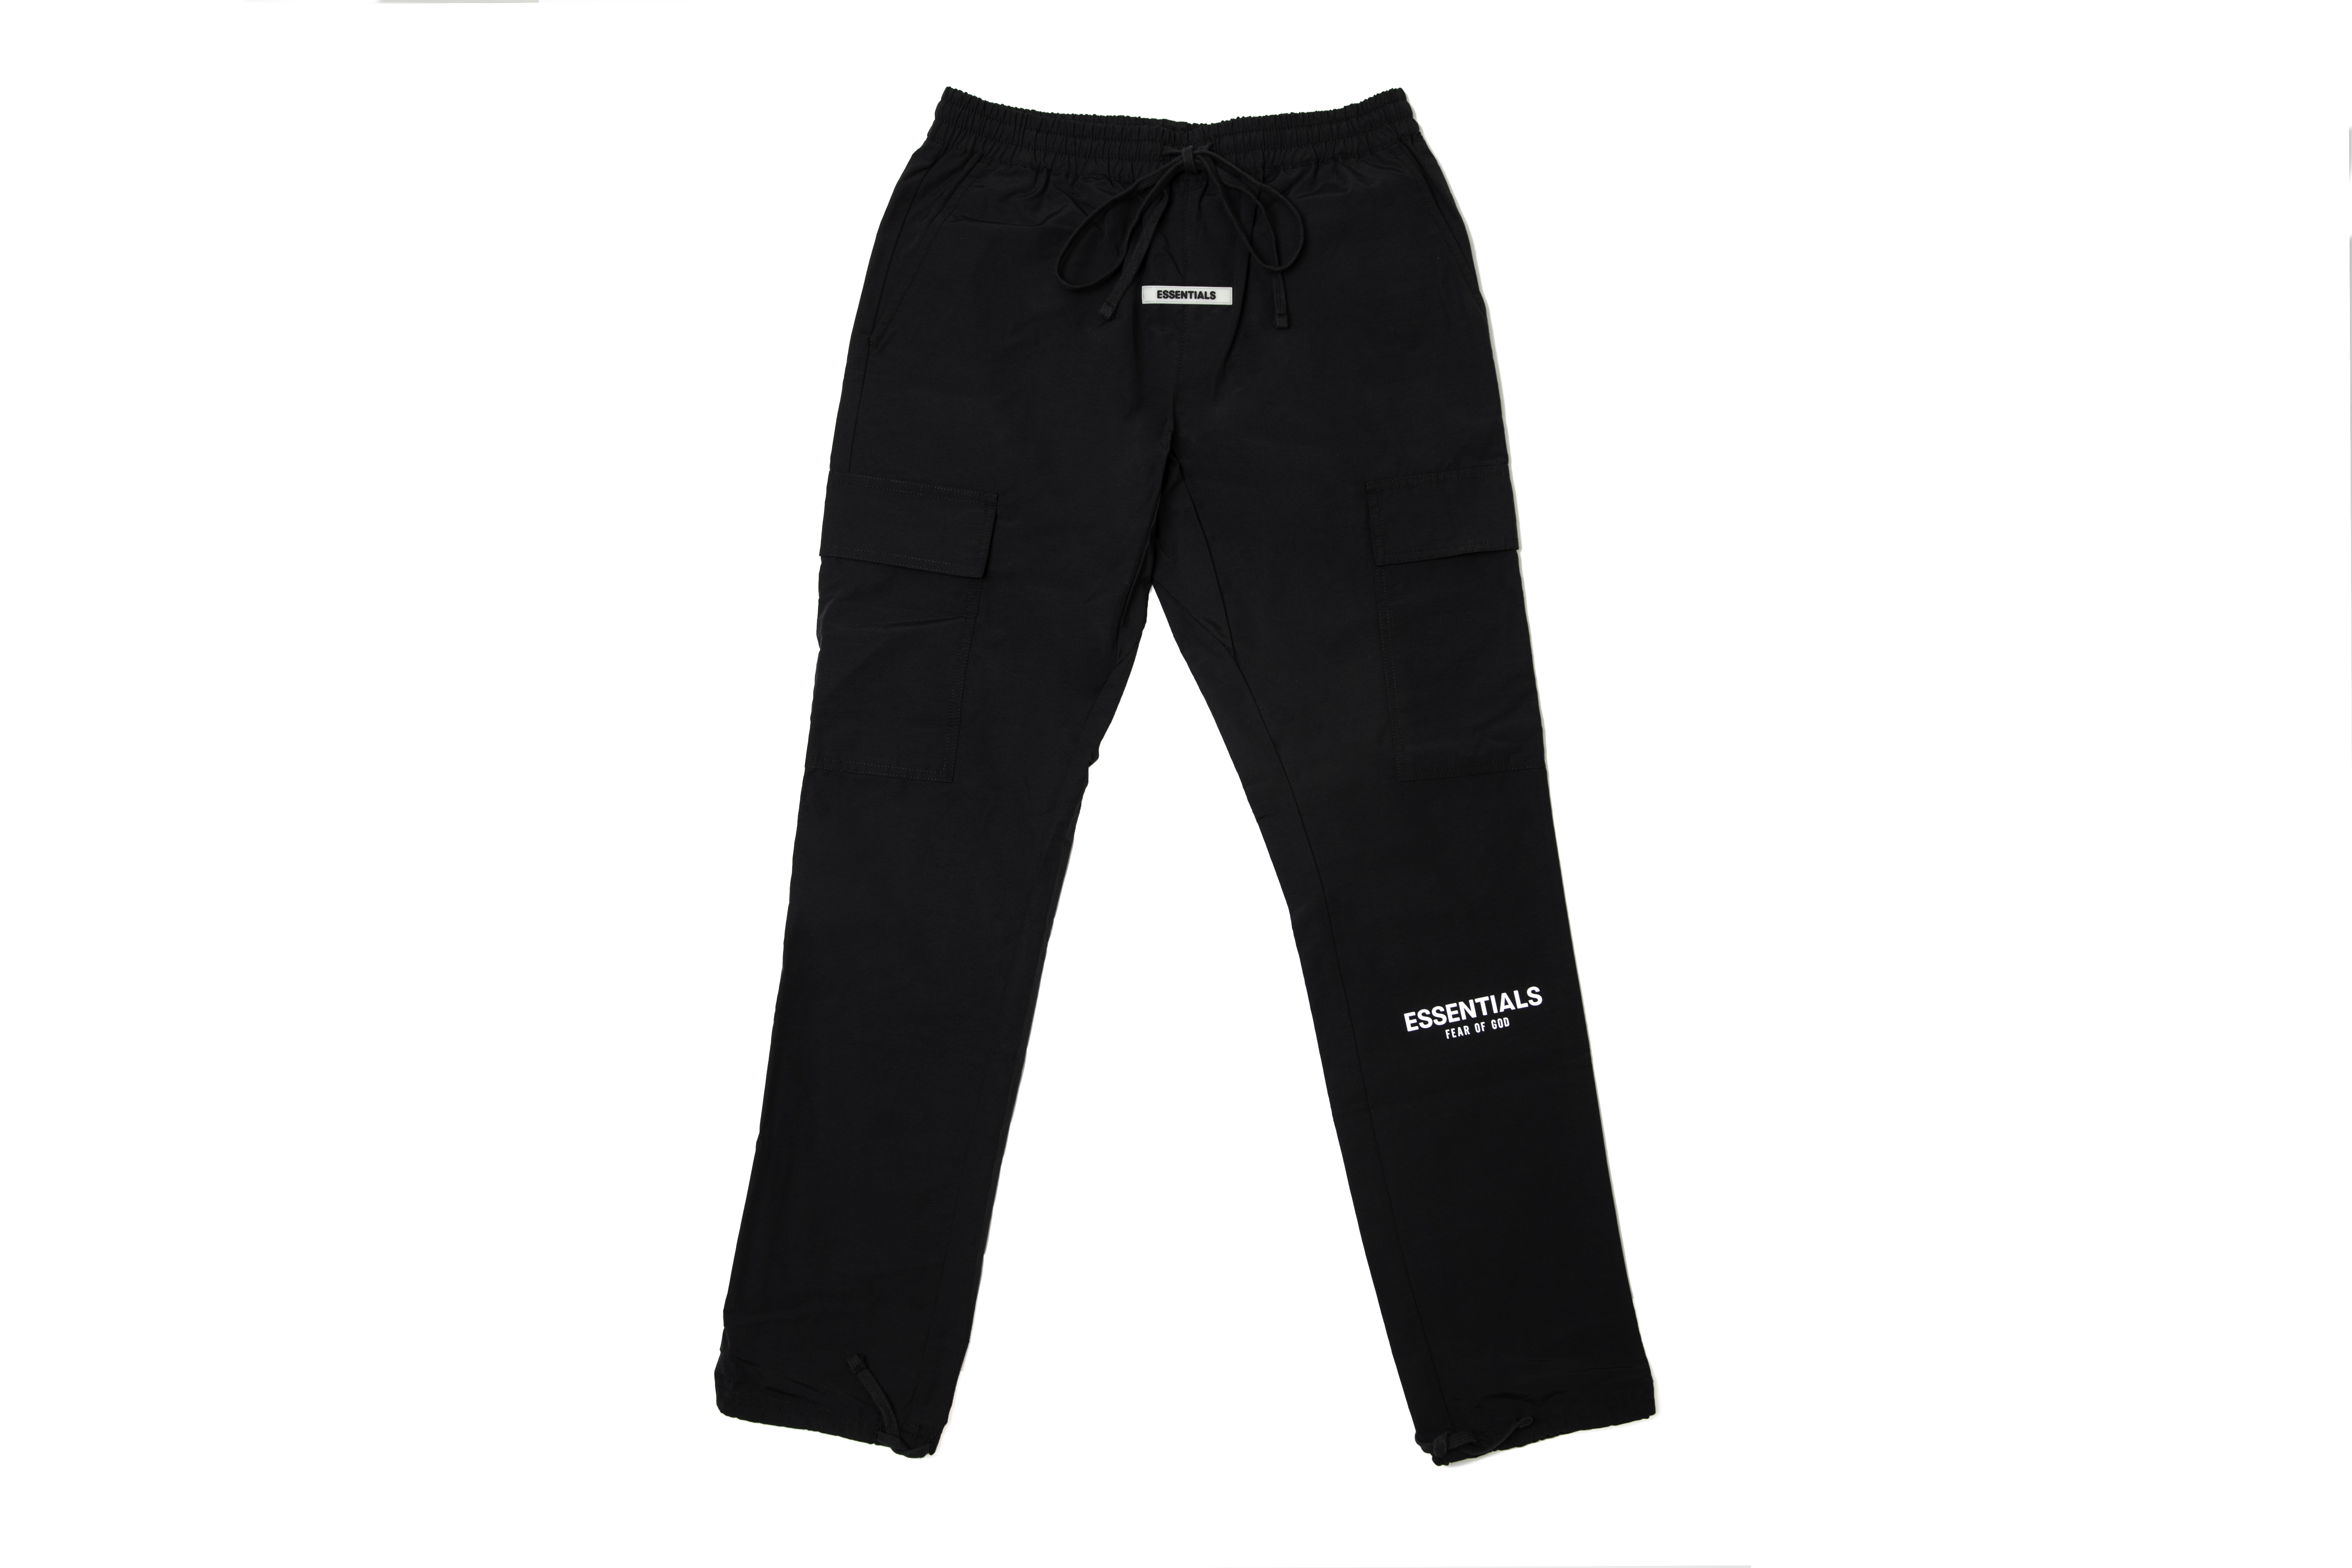 Black Polyester Cargo Pants by Fear of God ESSENTIALS on Sale